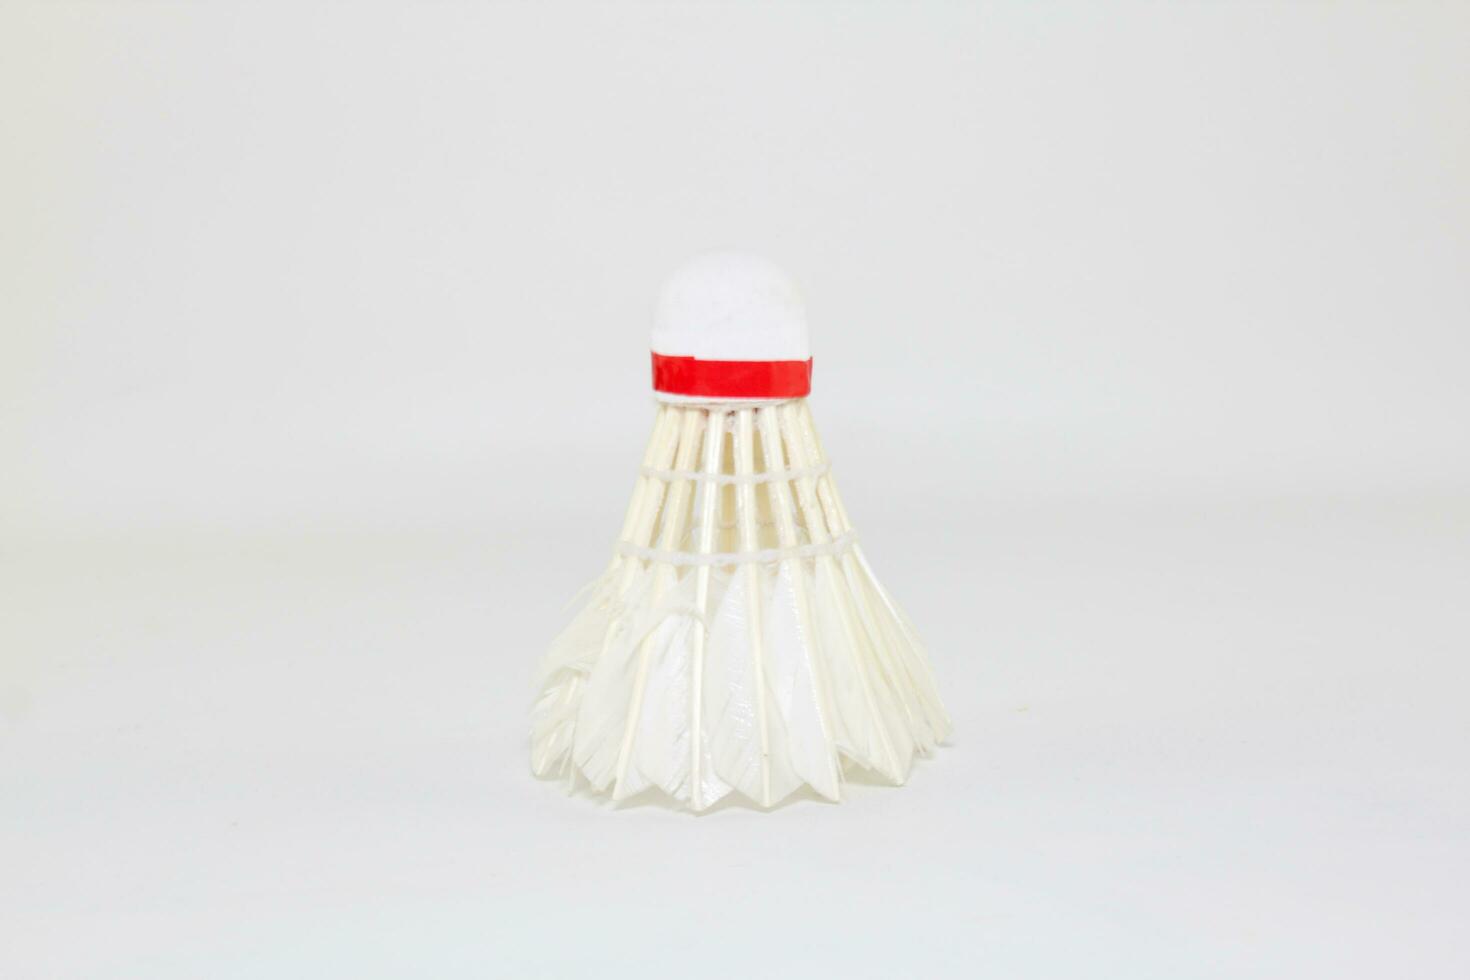 used shuttlecock Isolated on a White background photo